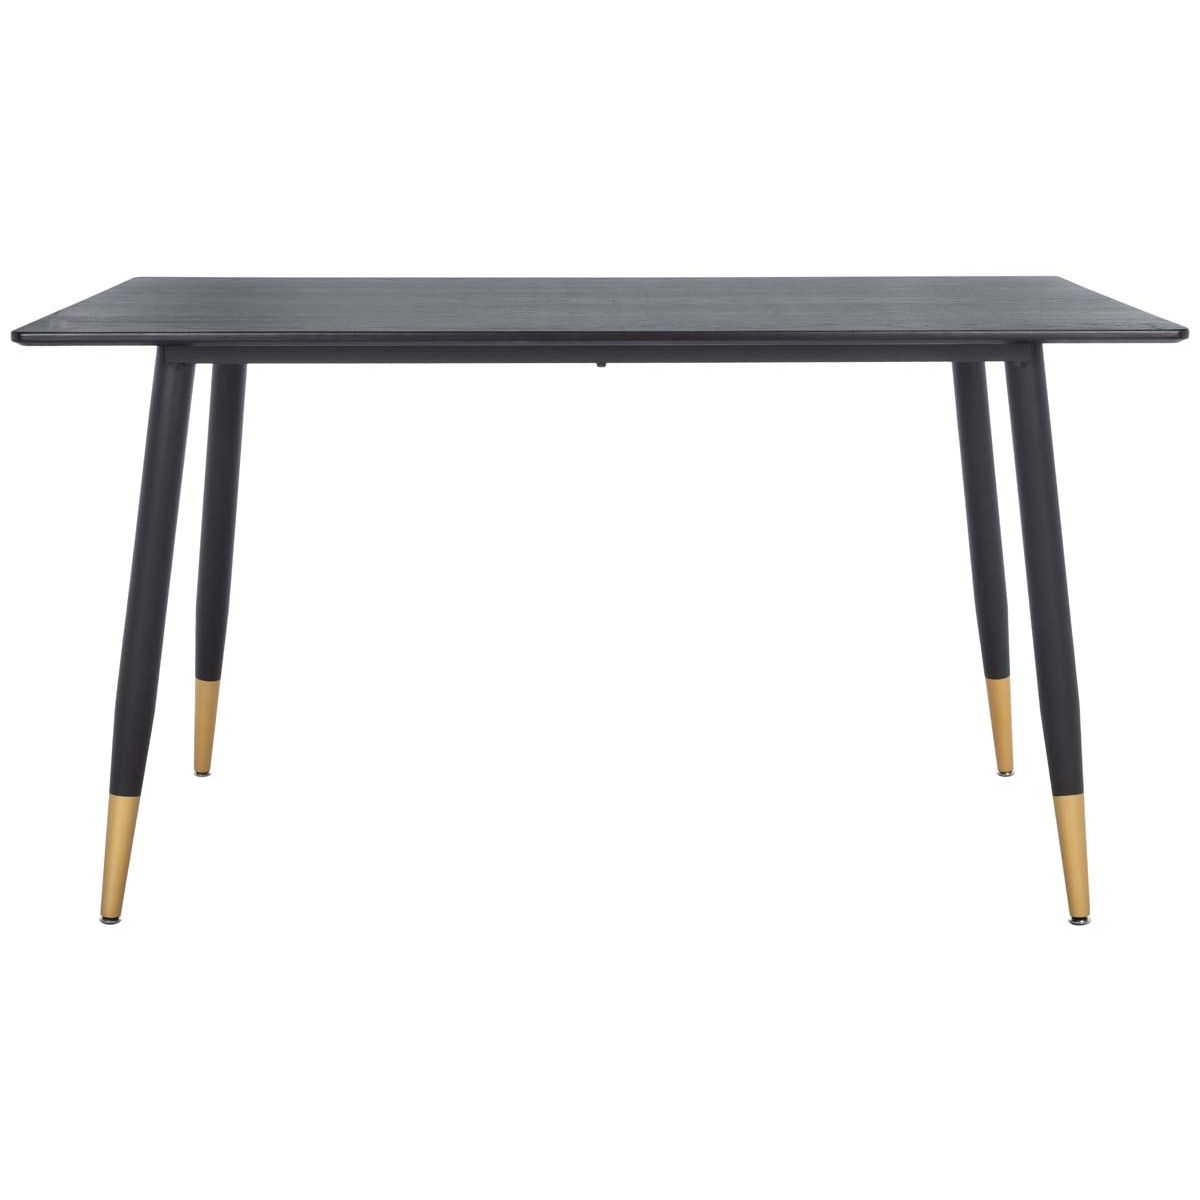 Safavieh Acre Dining Table , DTB5800